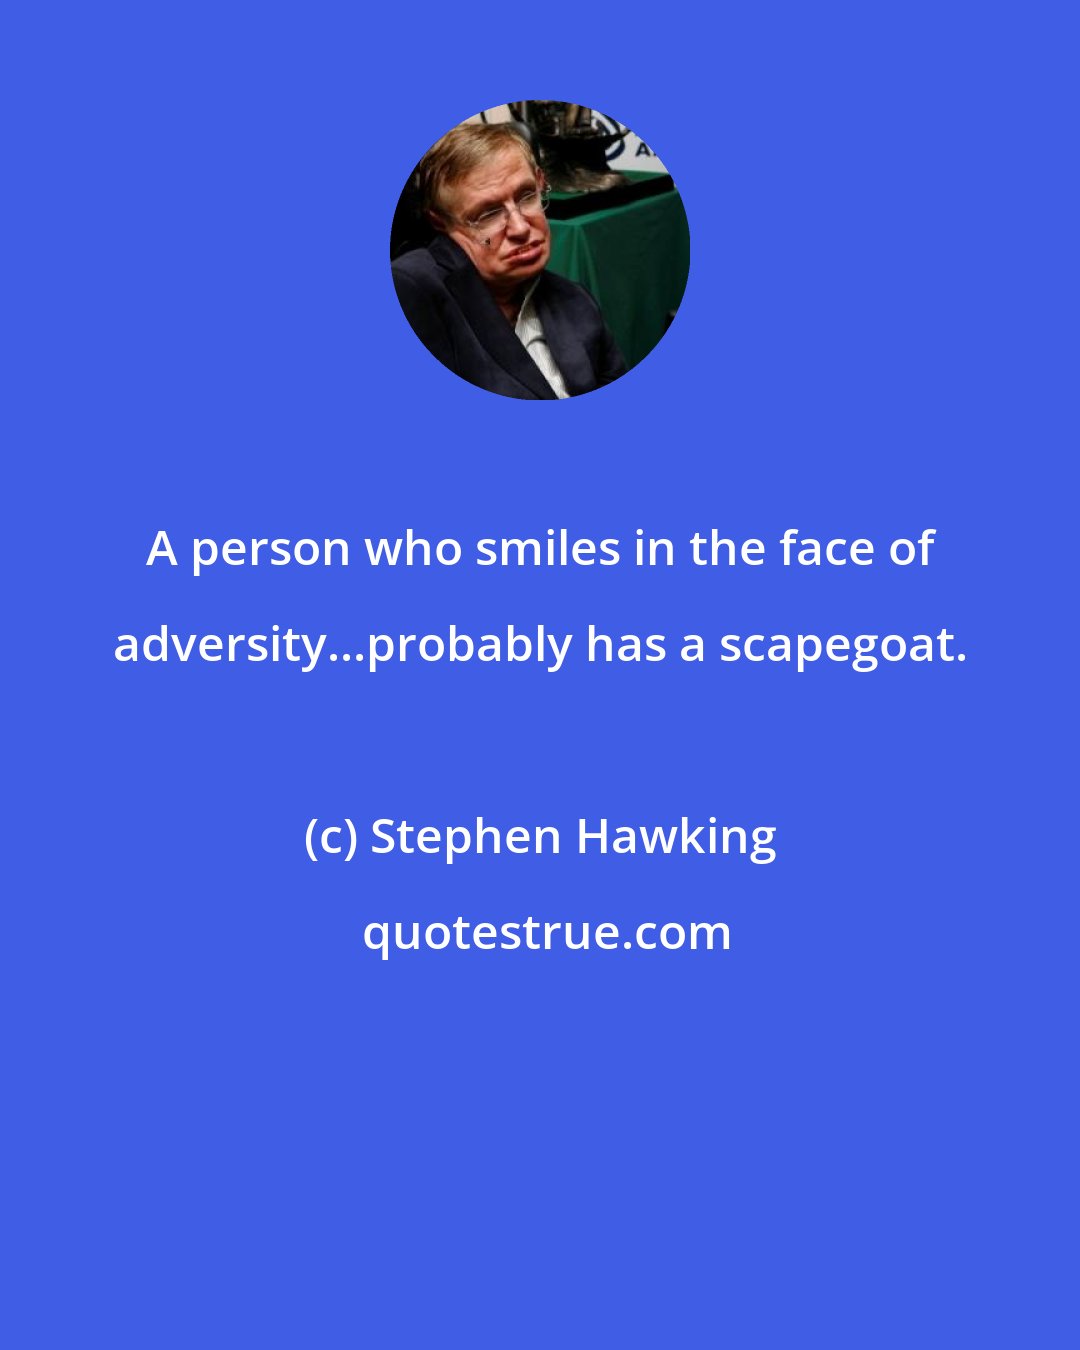 Stephen Hawking: A person who smiles in the face of adversity...probably has a scapegoat.